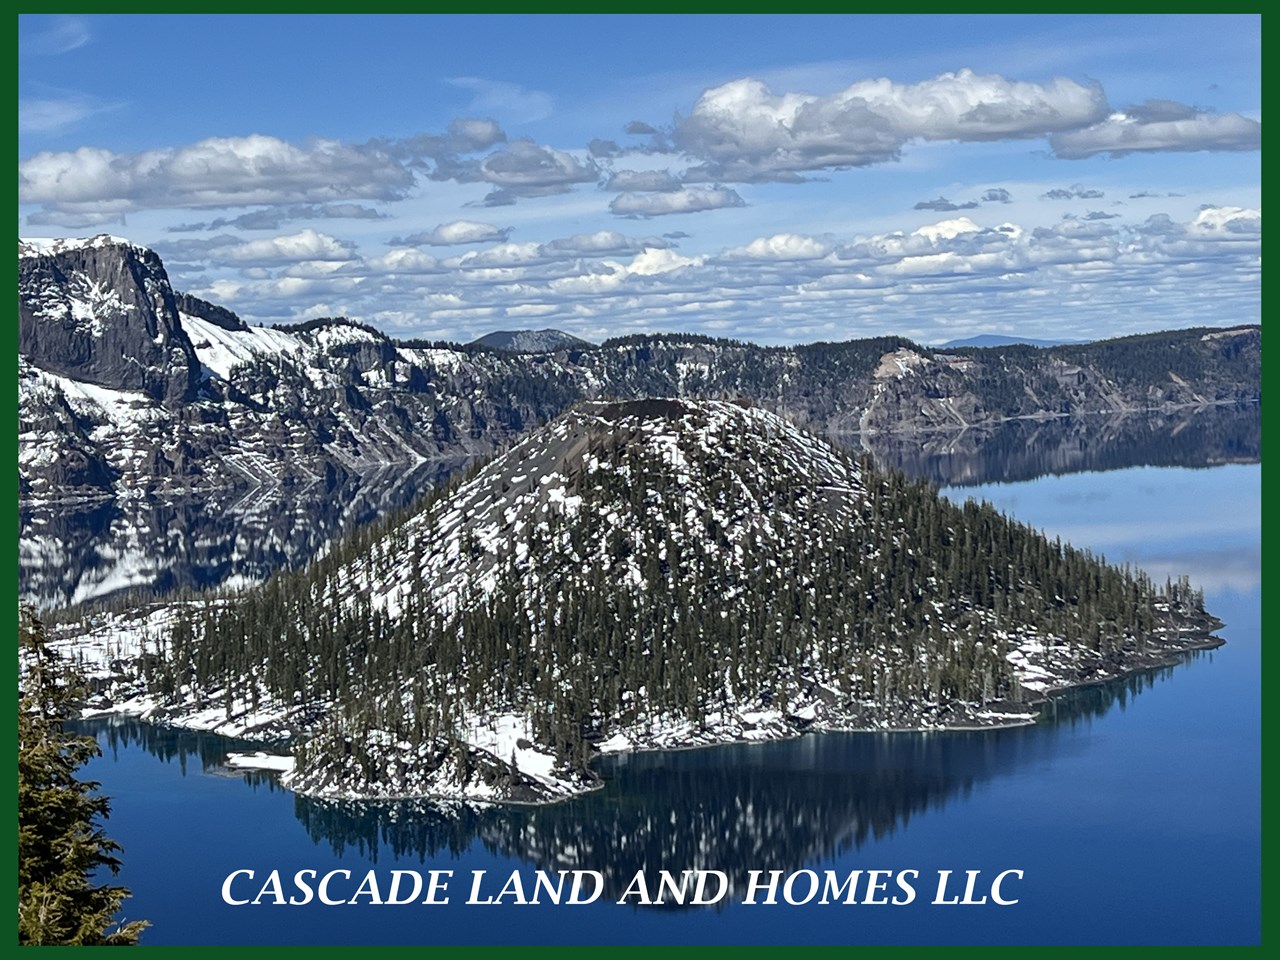 crater lake national park is only about 45 minutes away!